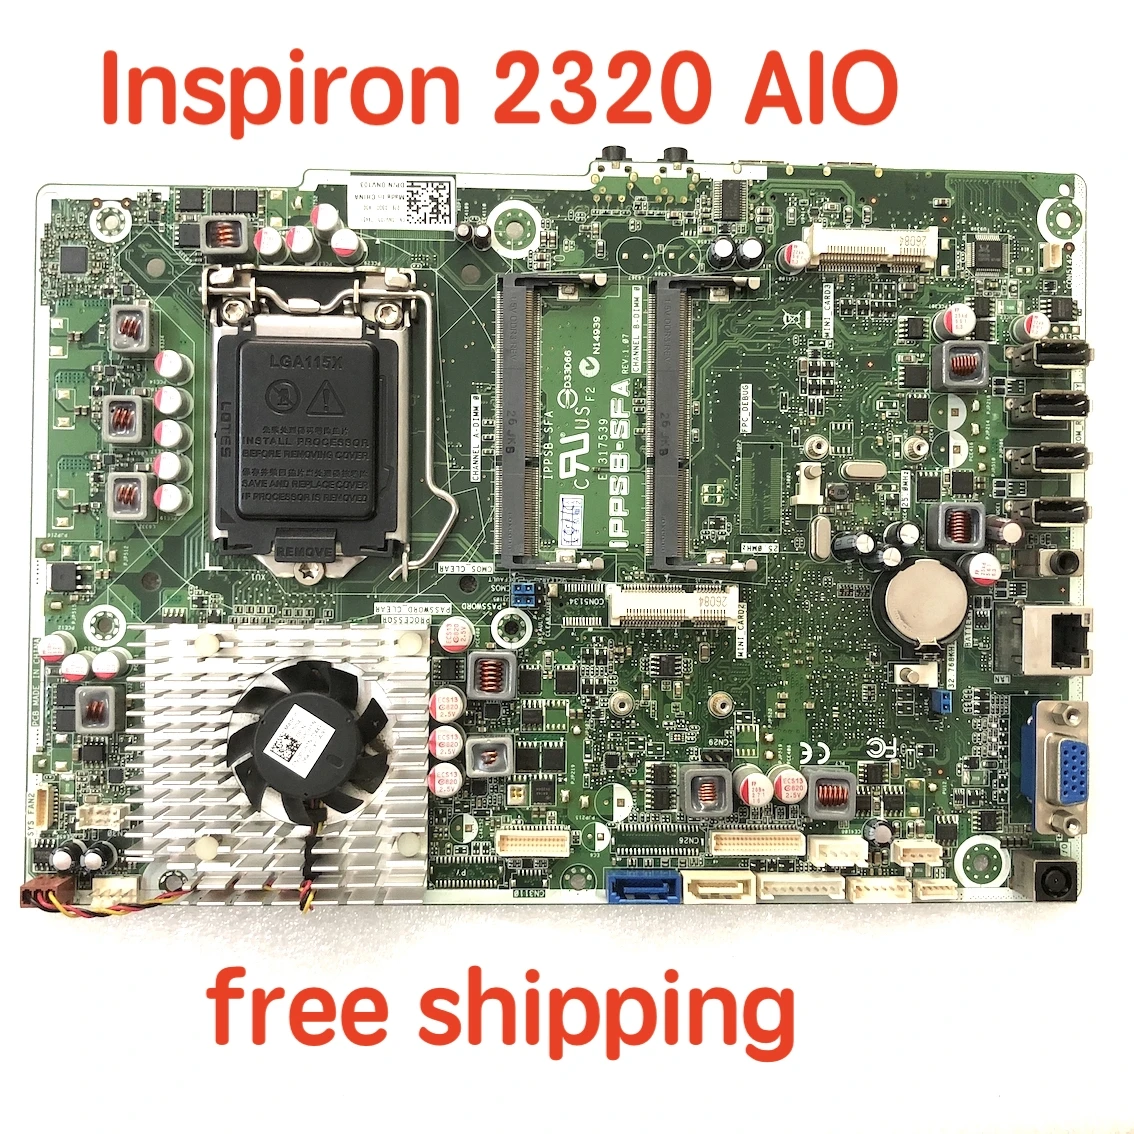 cheap motherboard for pc IPPSB-SFA For DELL Inspiron 2320 AIO Desktop Motherboard CN-0NV103 NV103 Mainboard 100%tested fully work best computer motherboard